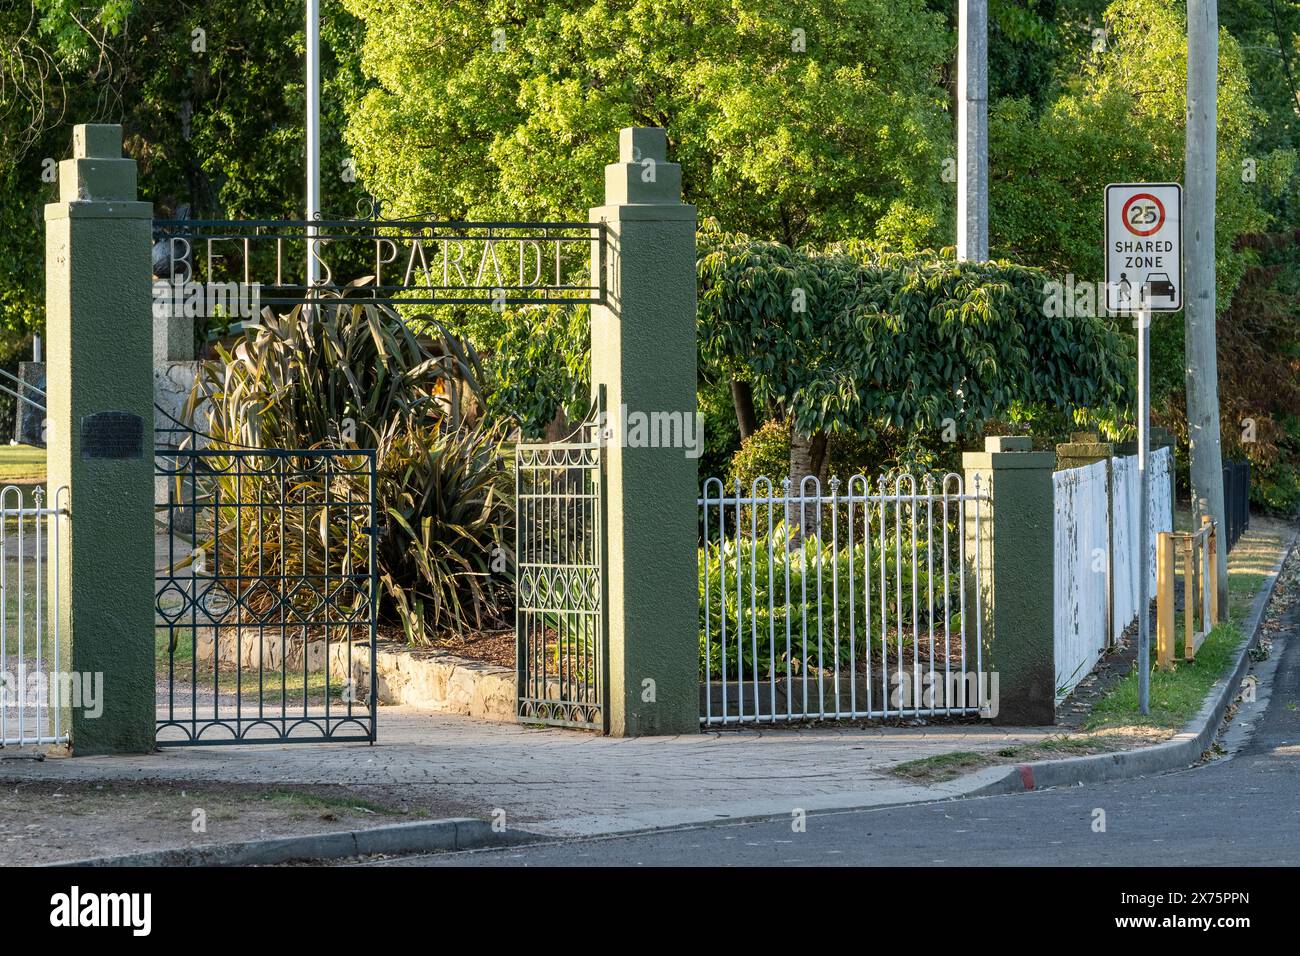 Gated entrance to the Bells Parade Reserve on the banks of the Mersey River, Latrobe, Tasmania Stock Photo